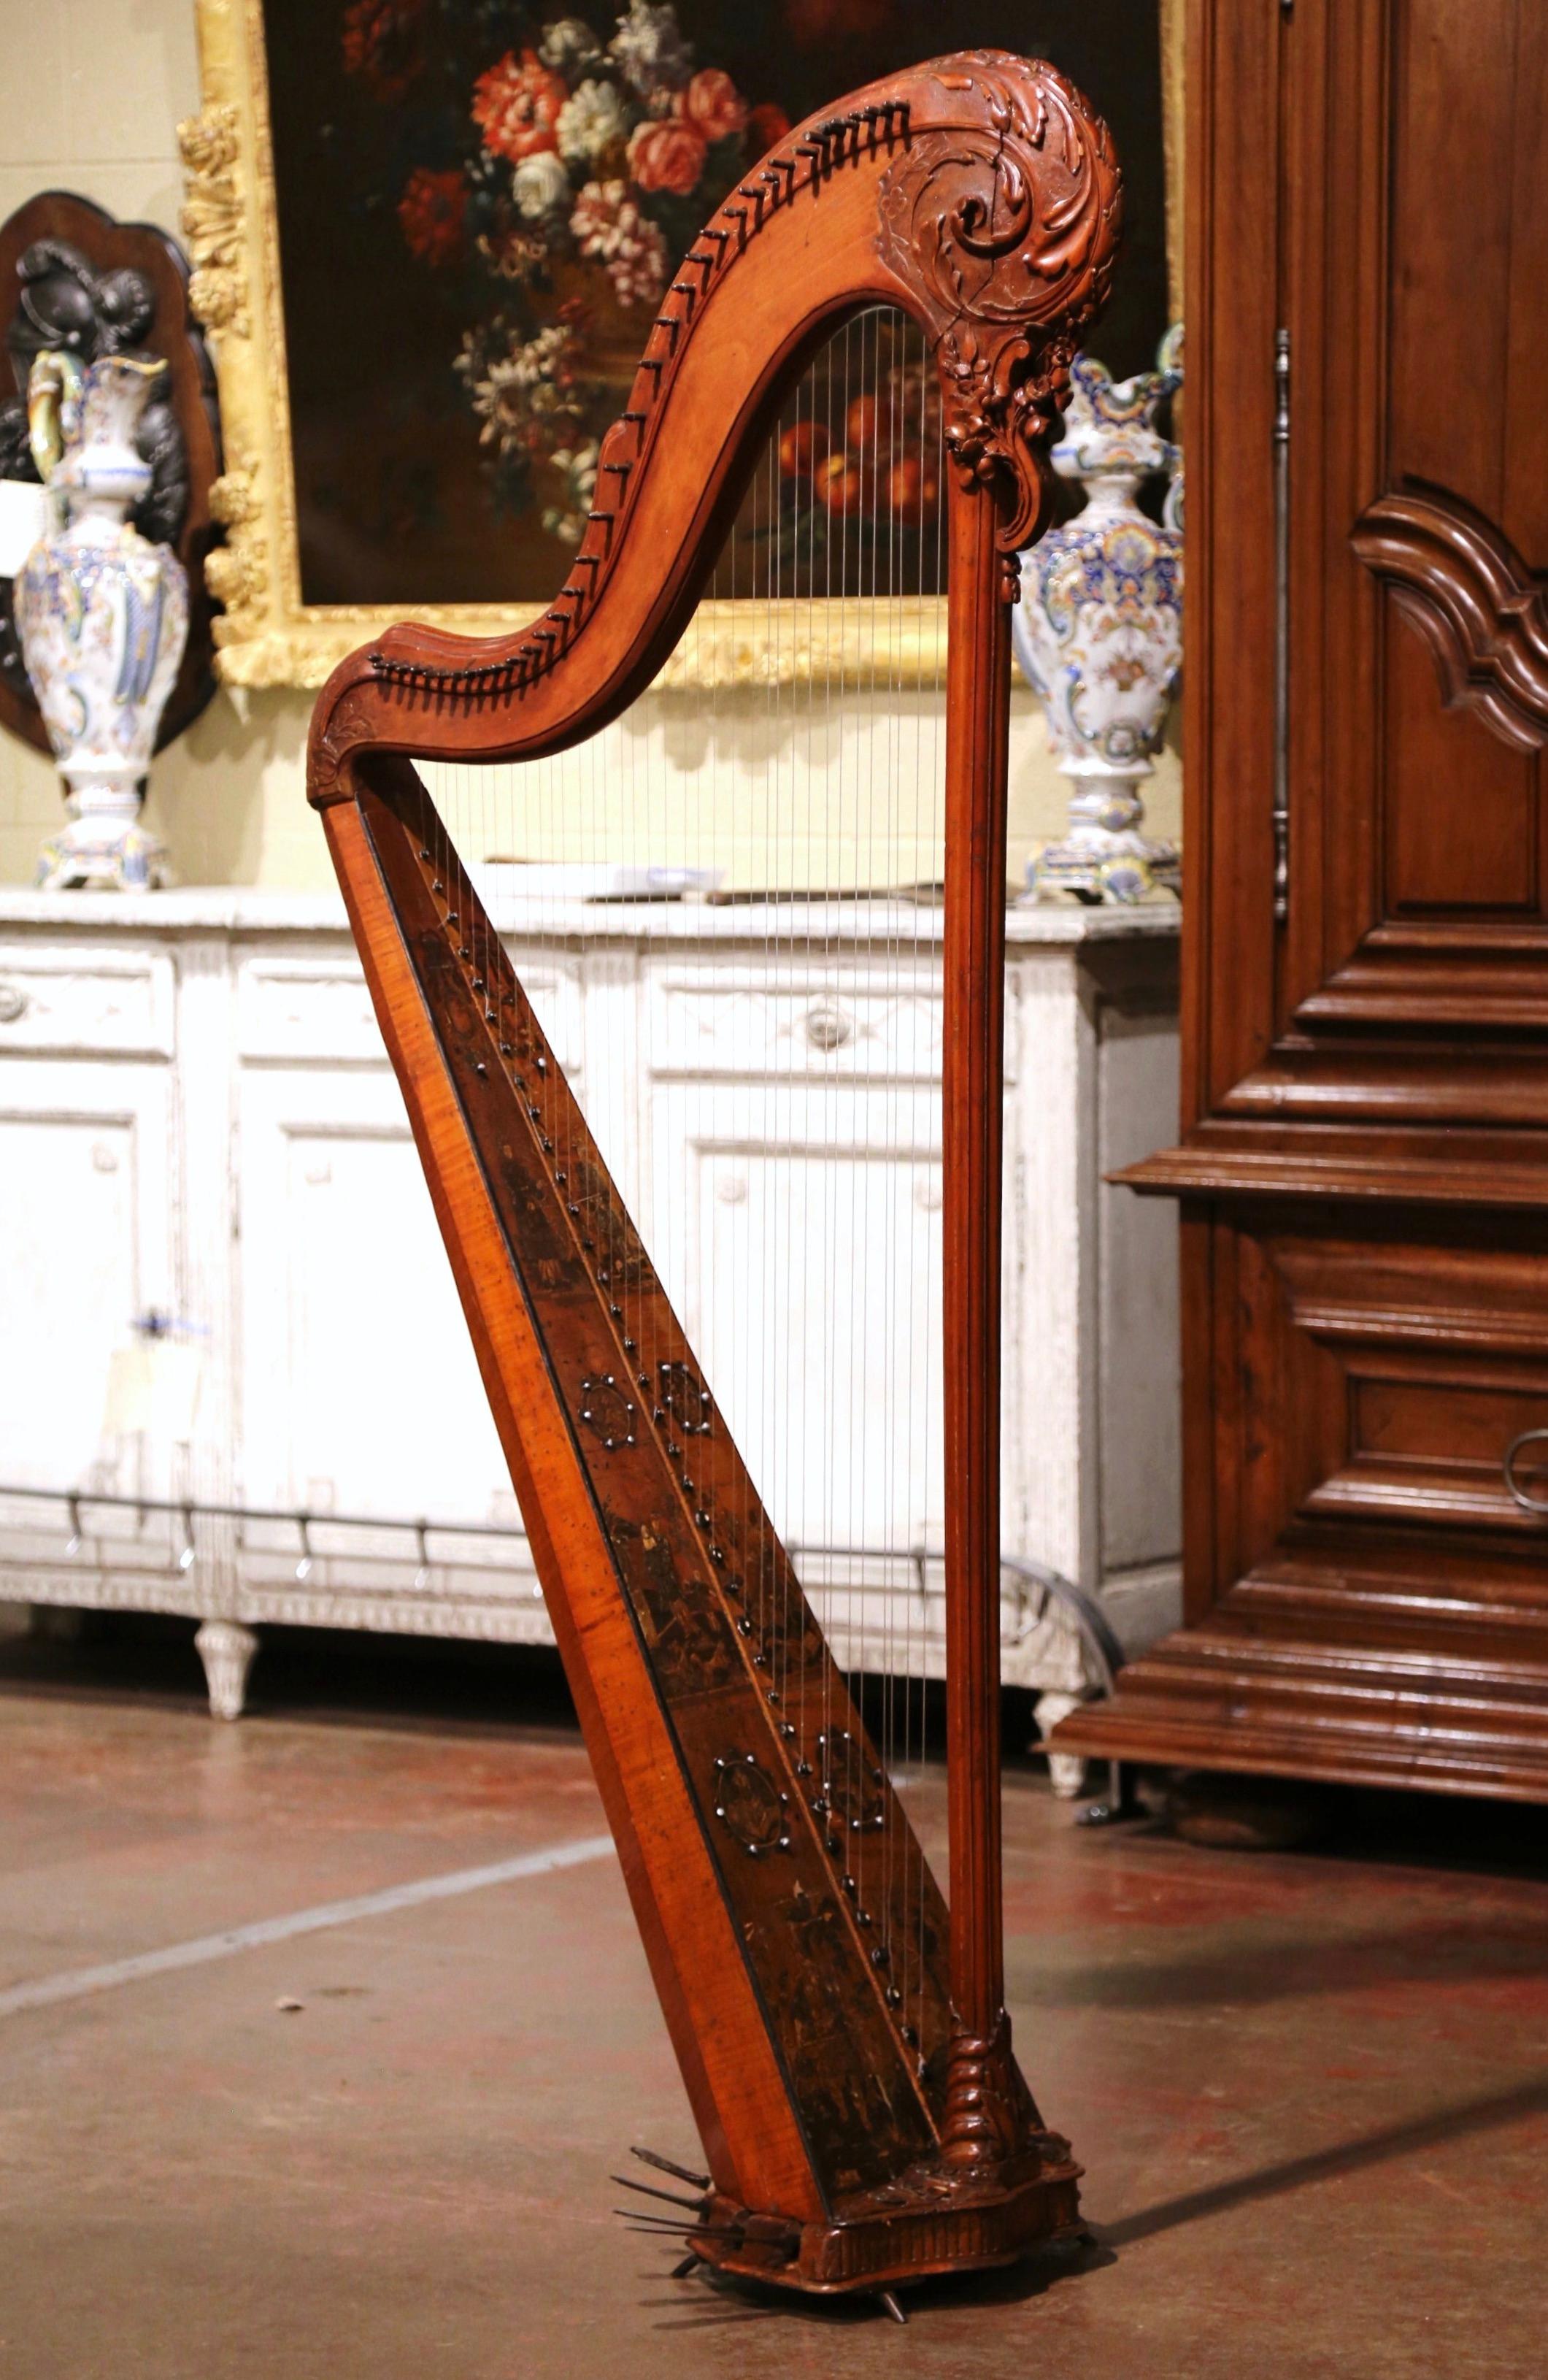 Decorate a living room with this elegant antique pedal harp. Crafted in France circa 1780, the single action musical instrument features 36 recently replaced strings to the gilt foliate faux rosewood sound board. The grained soundboard is further